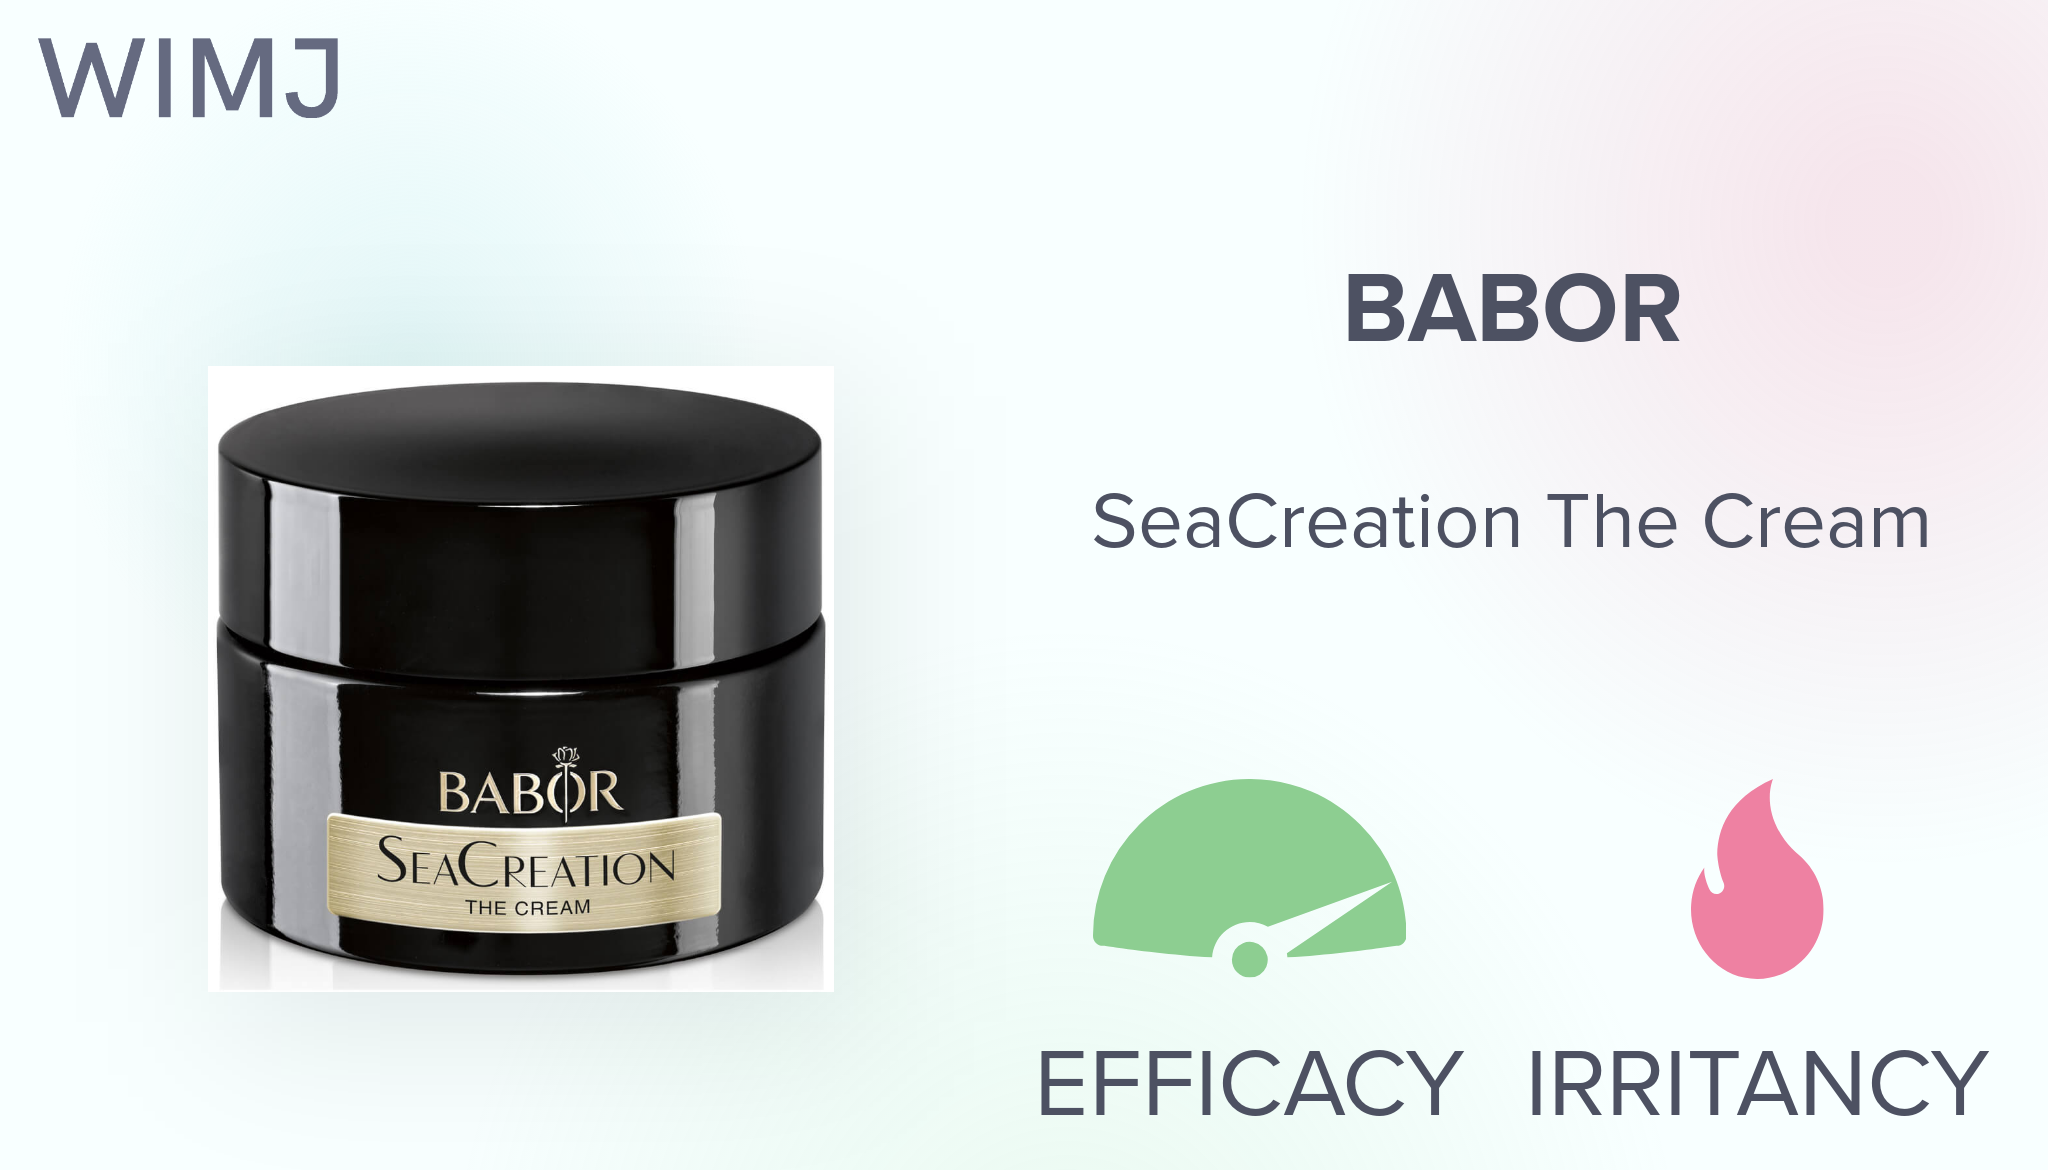 Review: BABOR - SeaCreation The Cream - WIMJ